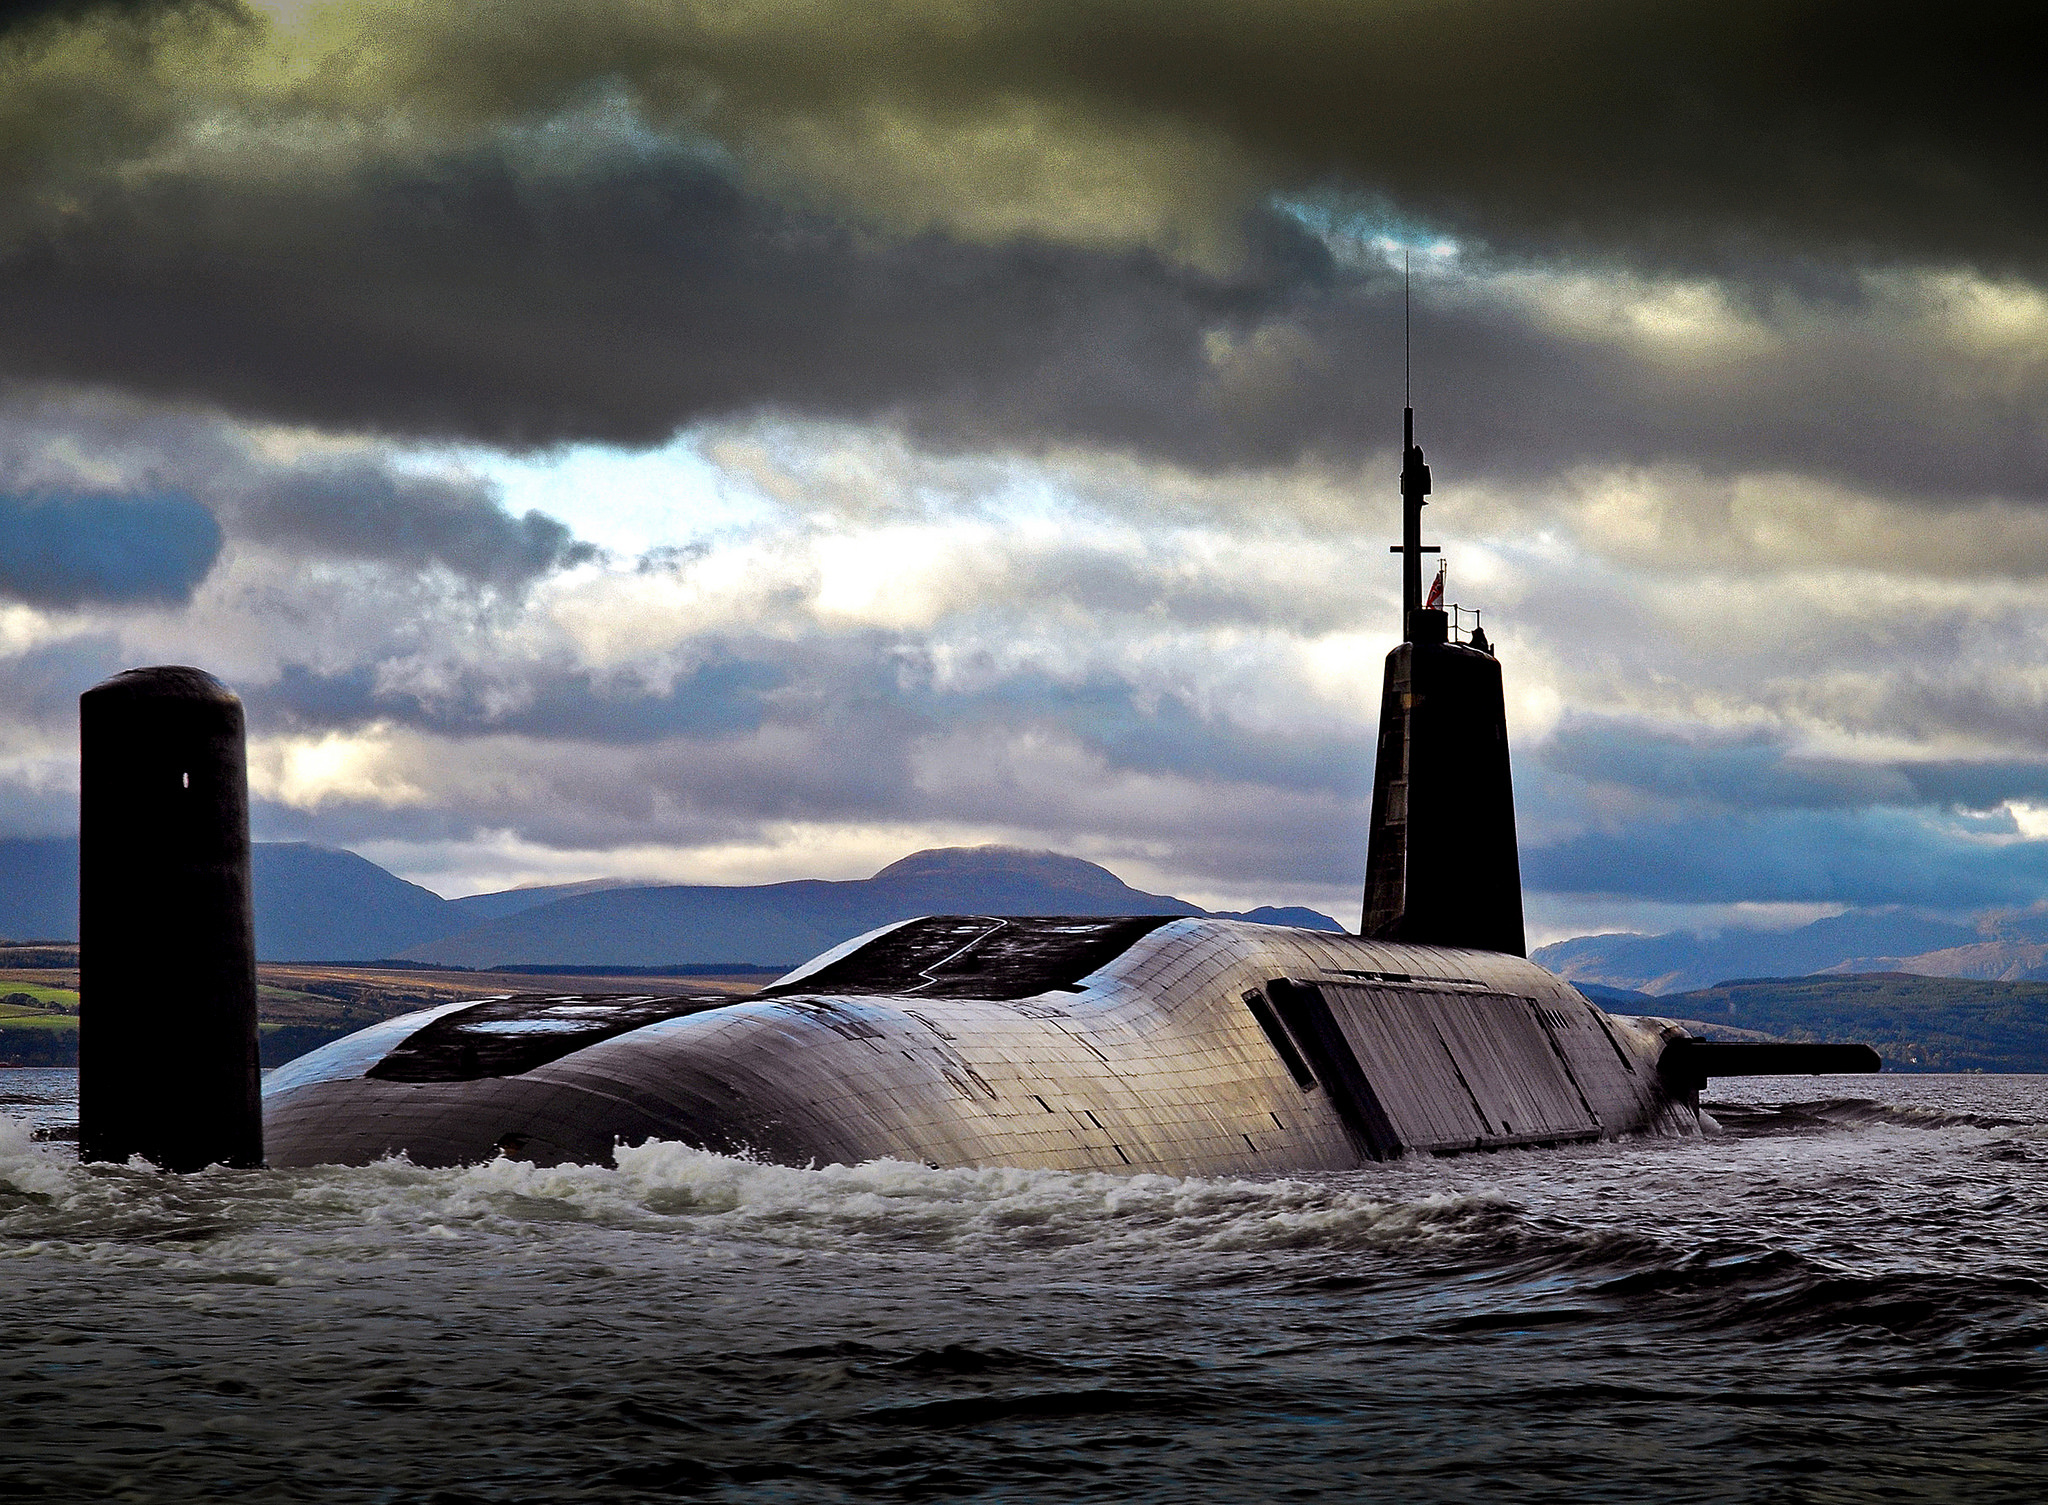 Hms vengeance nuclear submarine boat type vanguard wallpapers 2048x1505